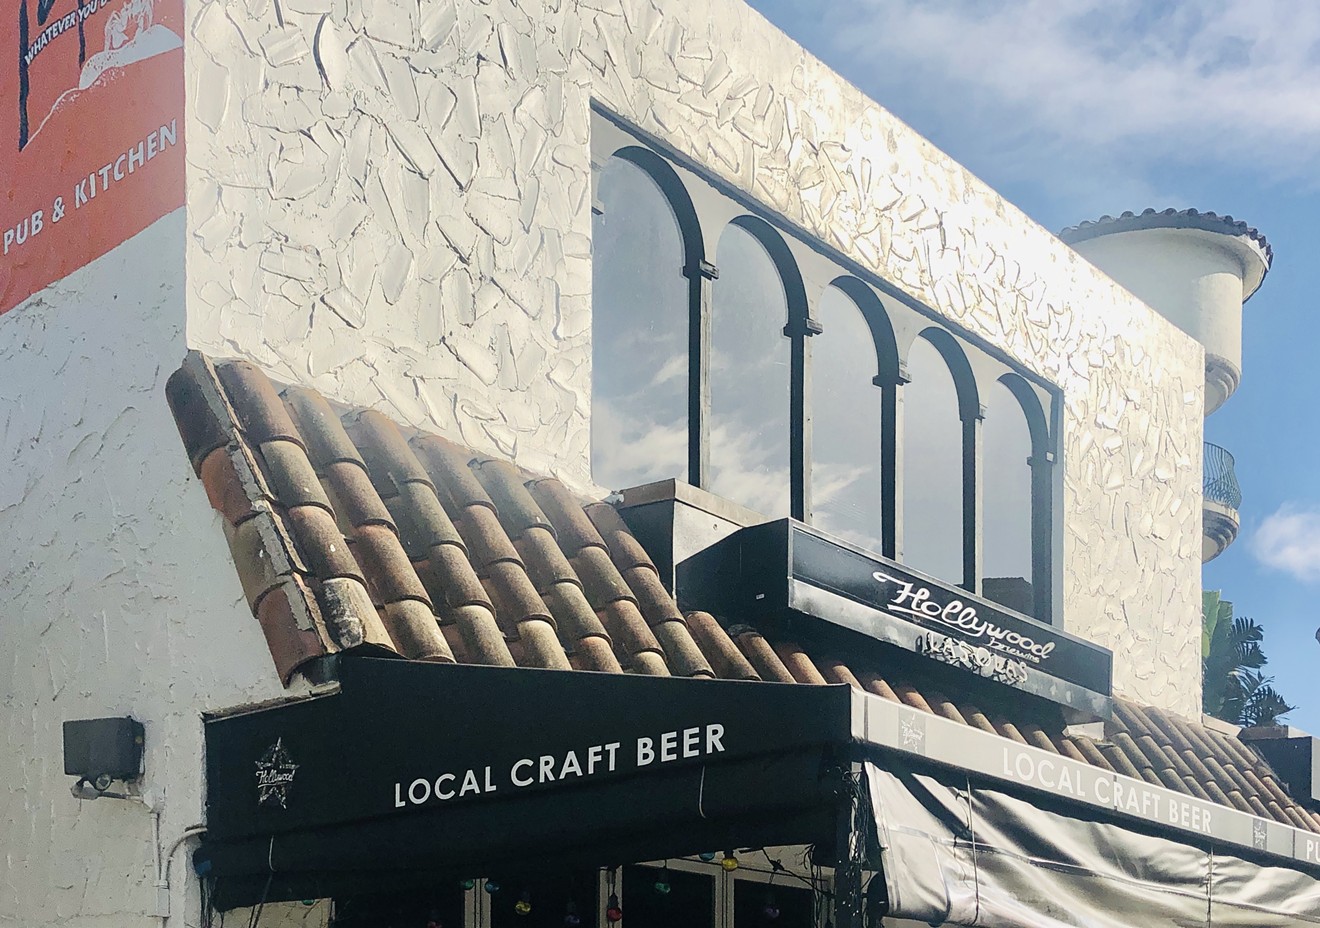 Hollywood Brewing Company has emerged on Las Olas Boulevard in Flight 19's old spot.